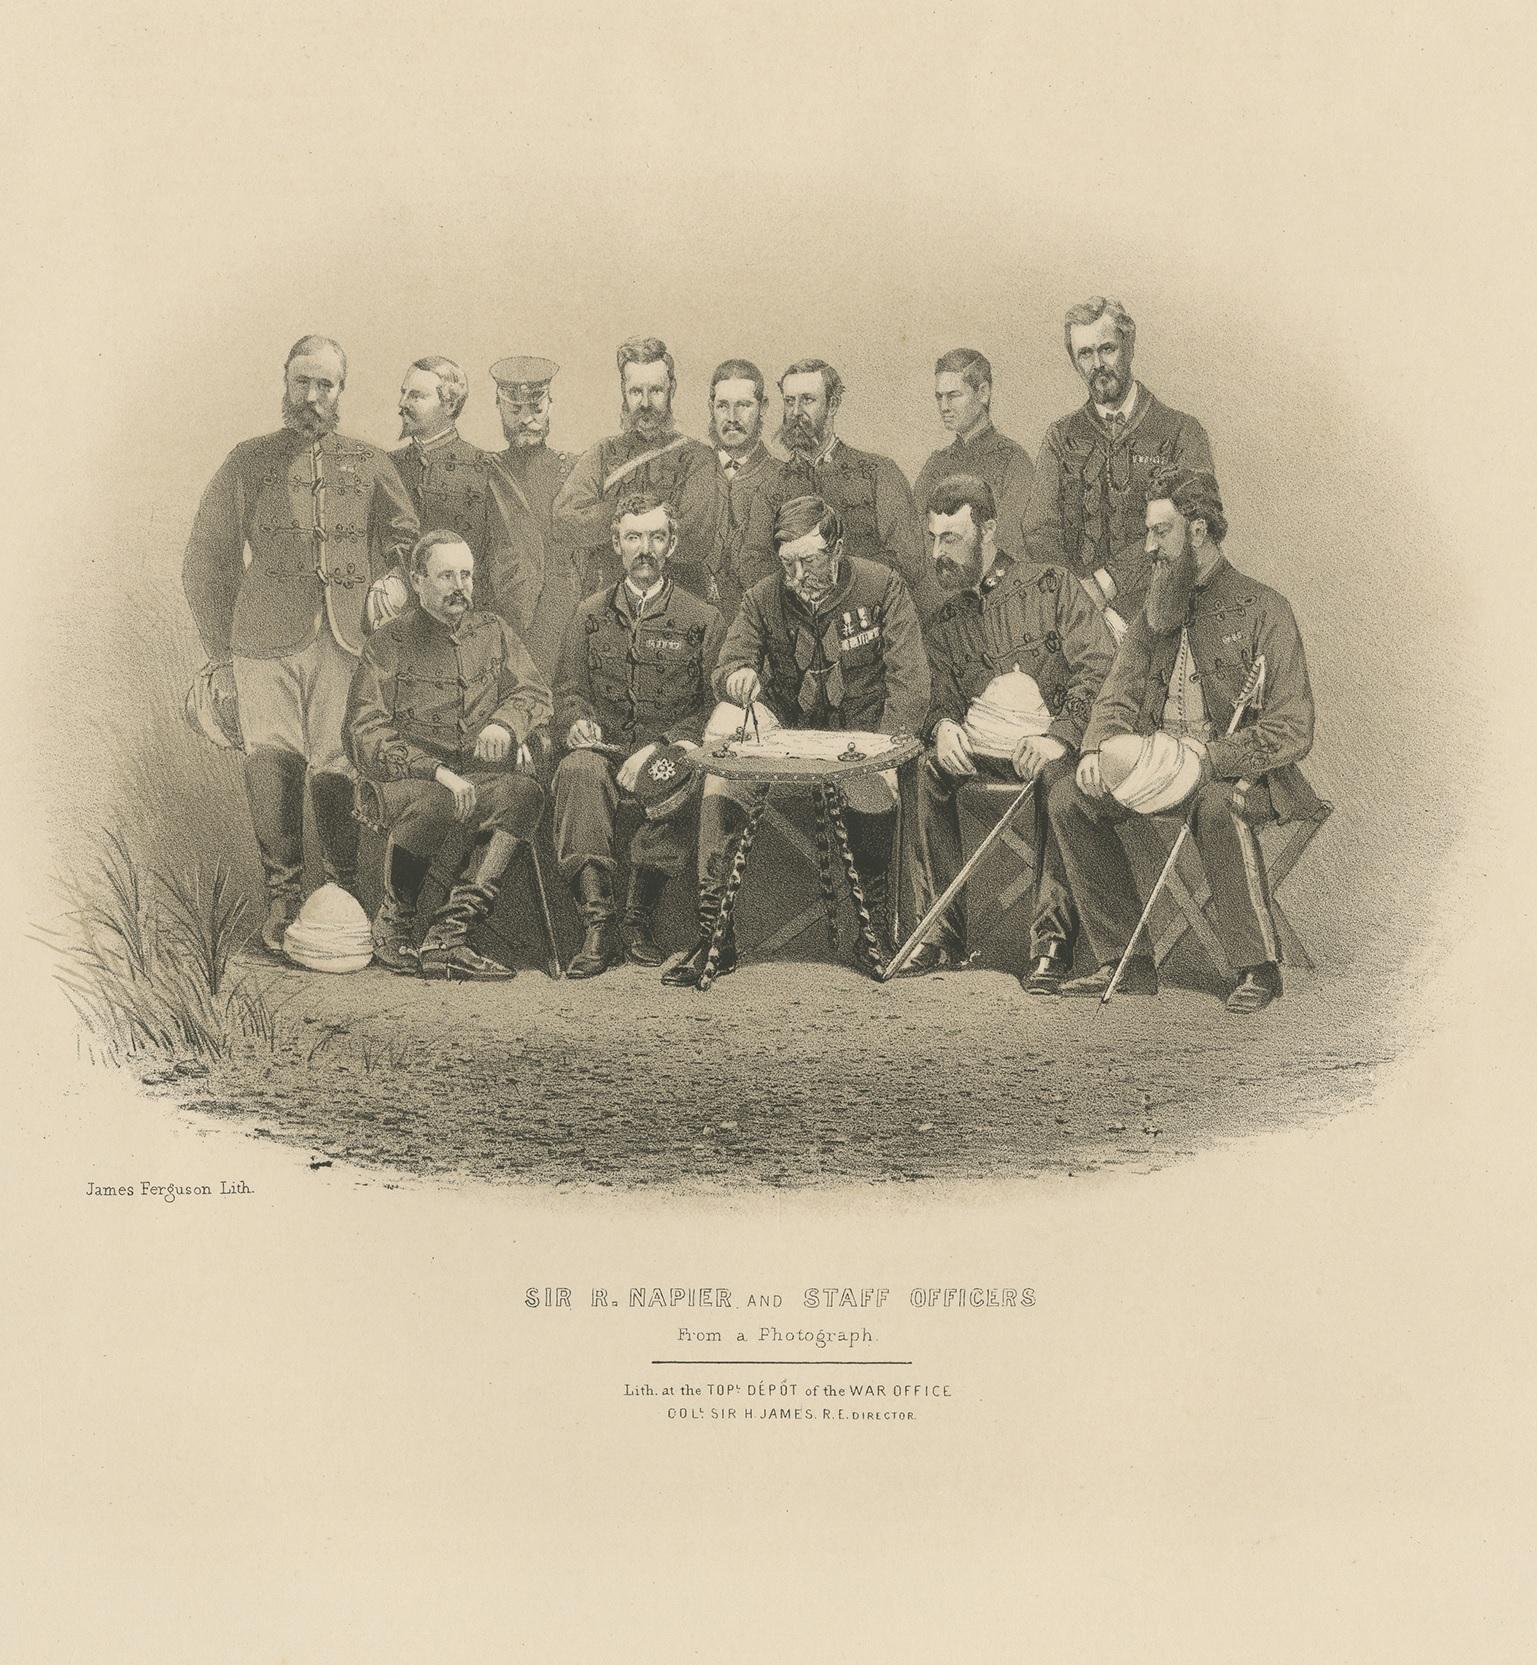 Antique print titled 'Sir. R. Napier and Staff Officers'. Lithograph of Robert Napier and staff officers. Robert Cornelis Napier, 1st Baron Napier of Magdala GCB GCSI FRS (6 December 1810 – 14 January 1890) was a British Indian Army officer. He